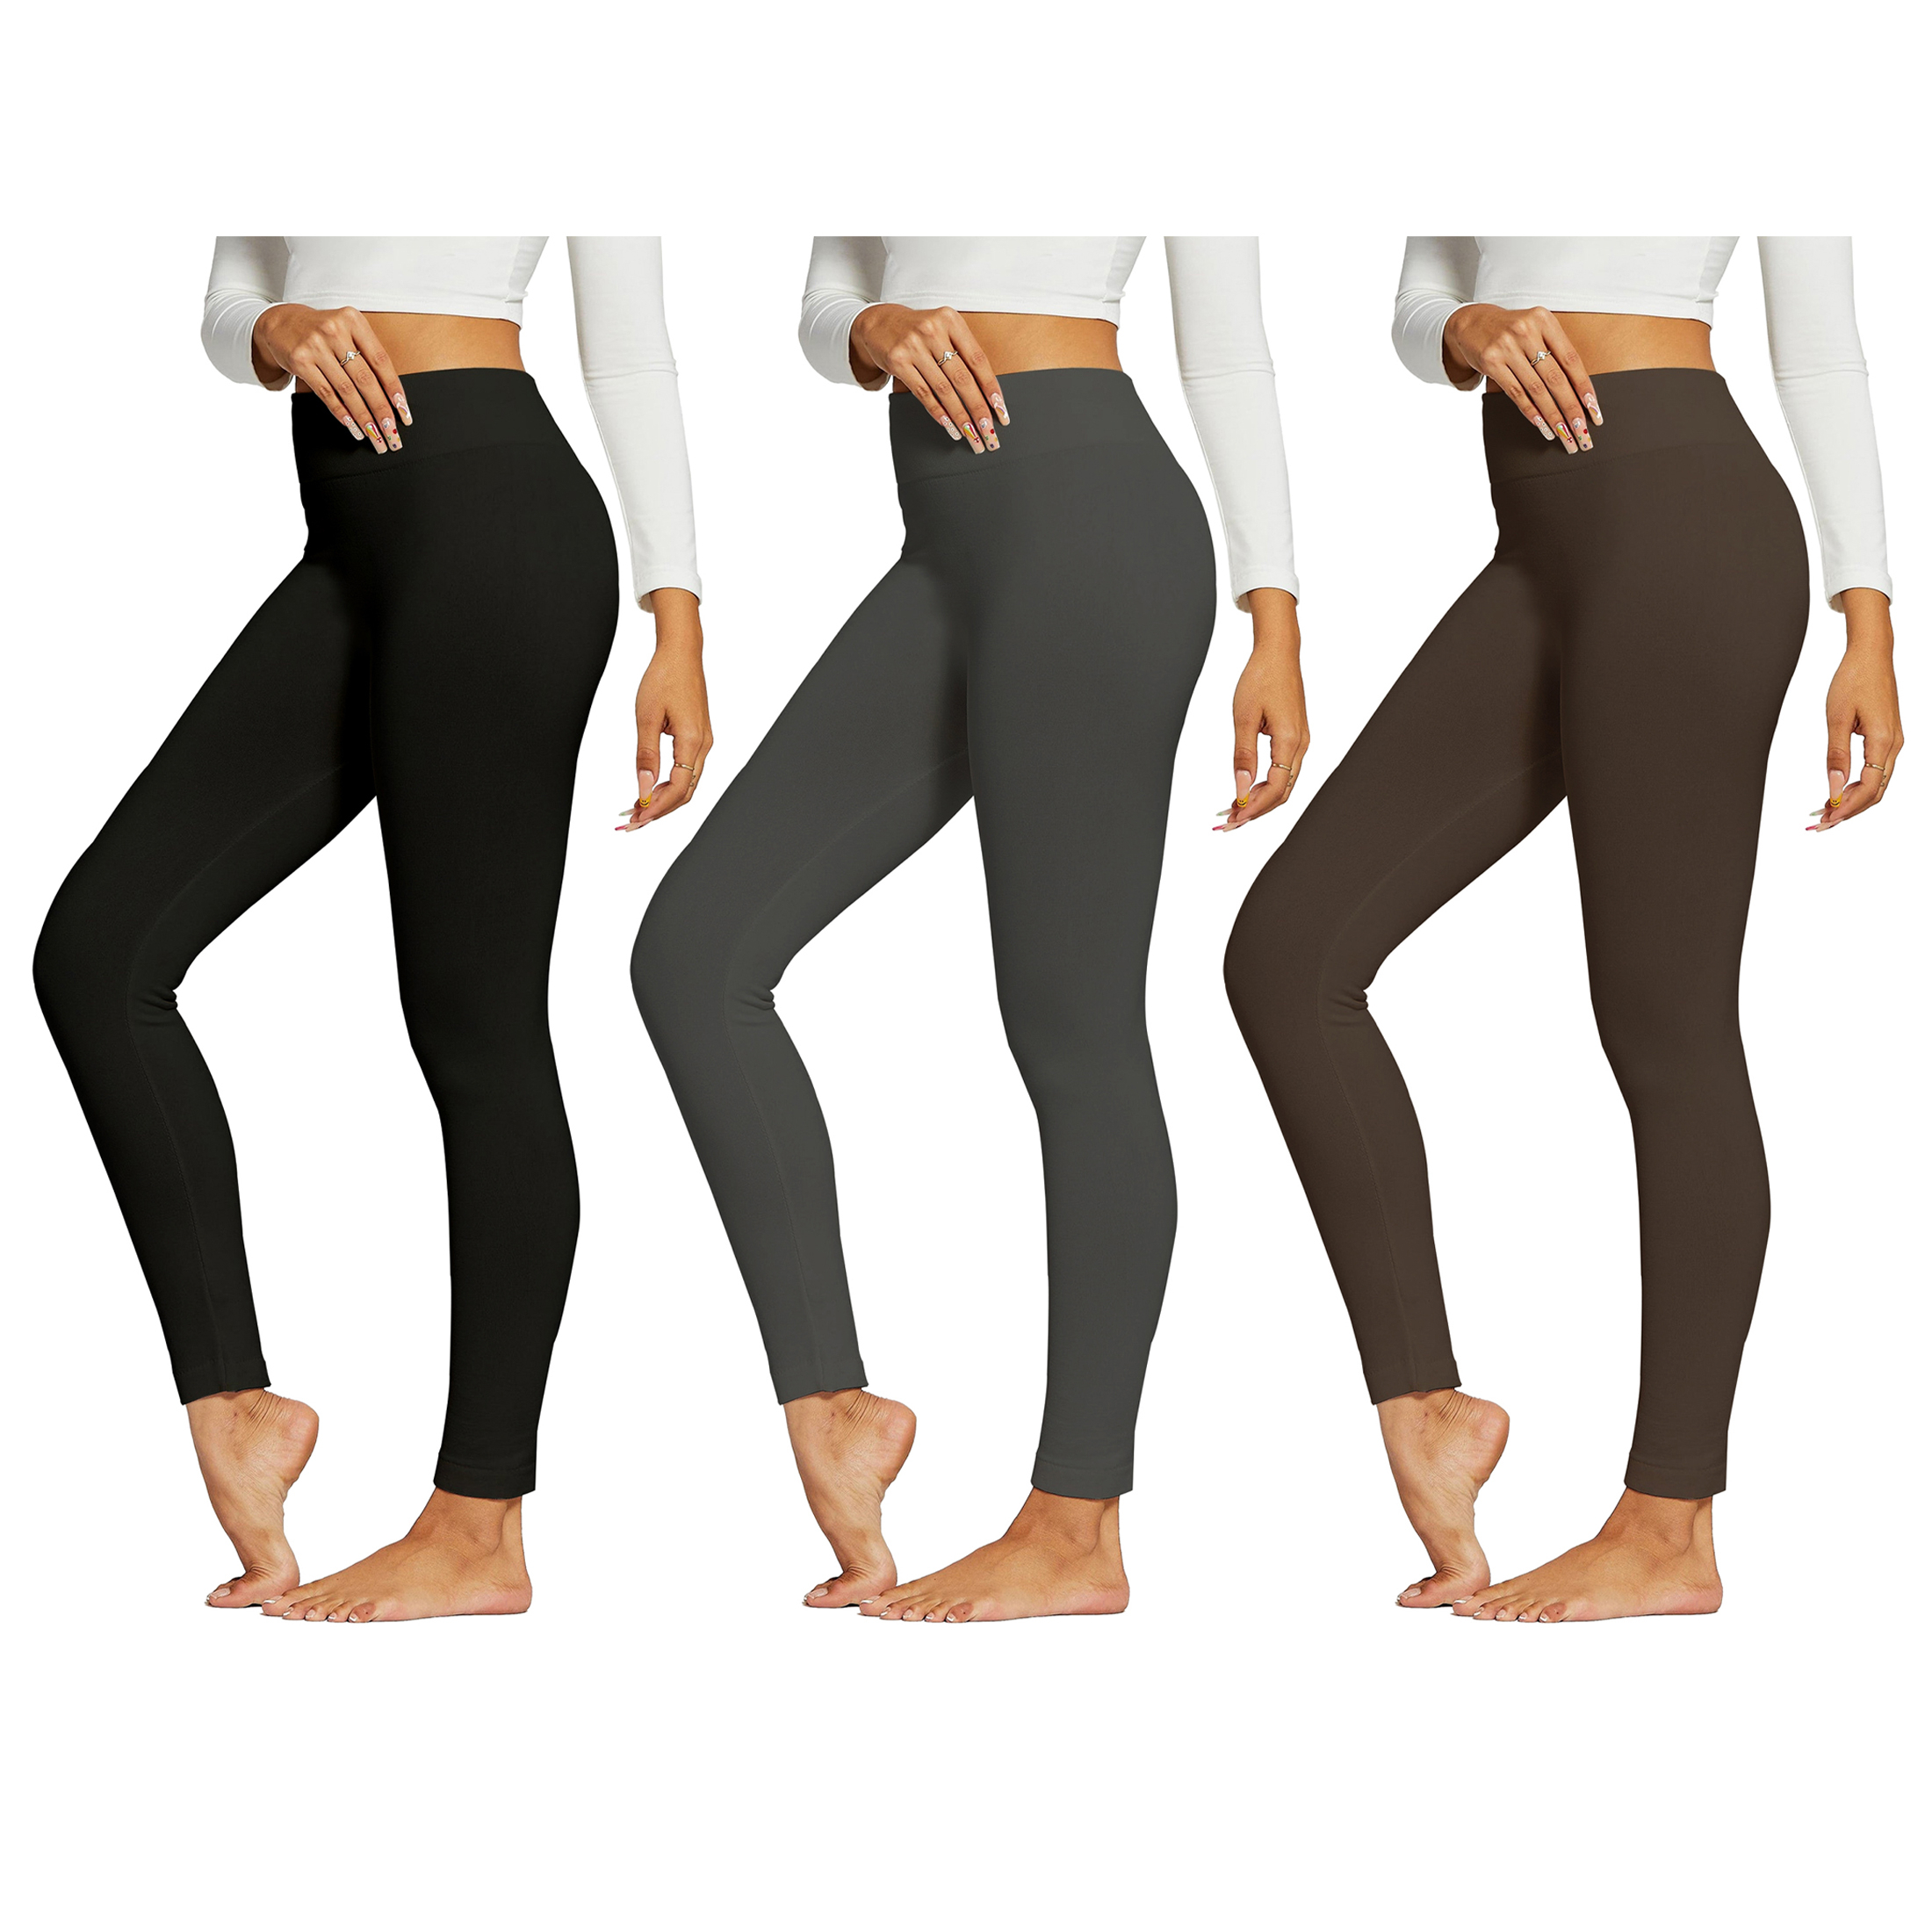 3-Pack:Women's Premium Quality High-Waist Fleece-Lined Leggings (Plus Size Available) - Black, Red & Brown, Small/Medium